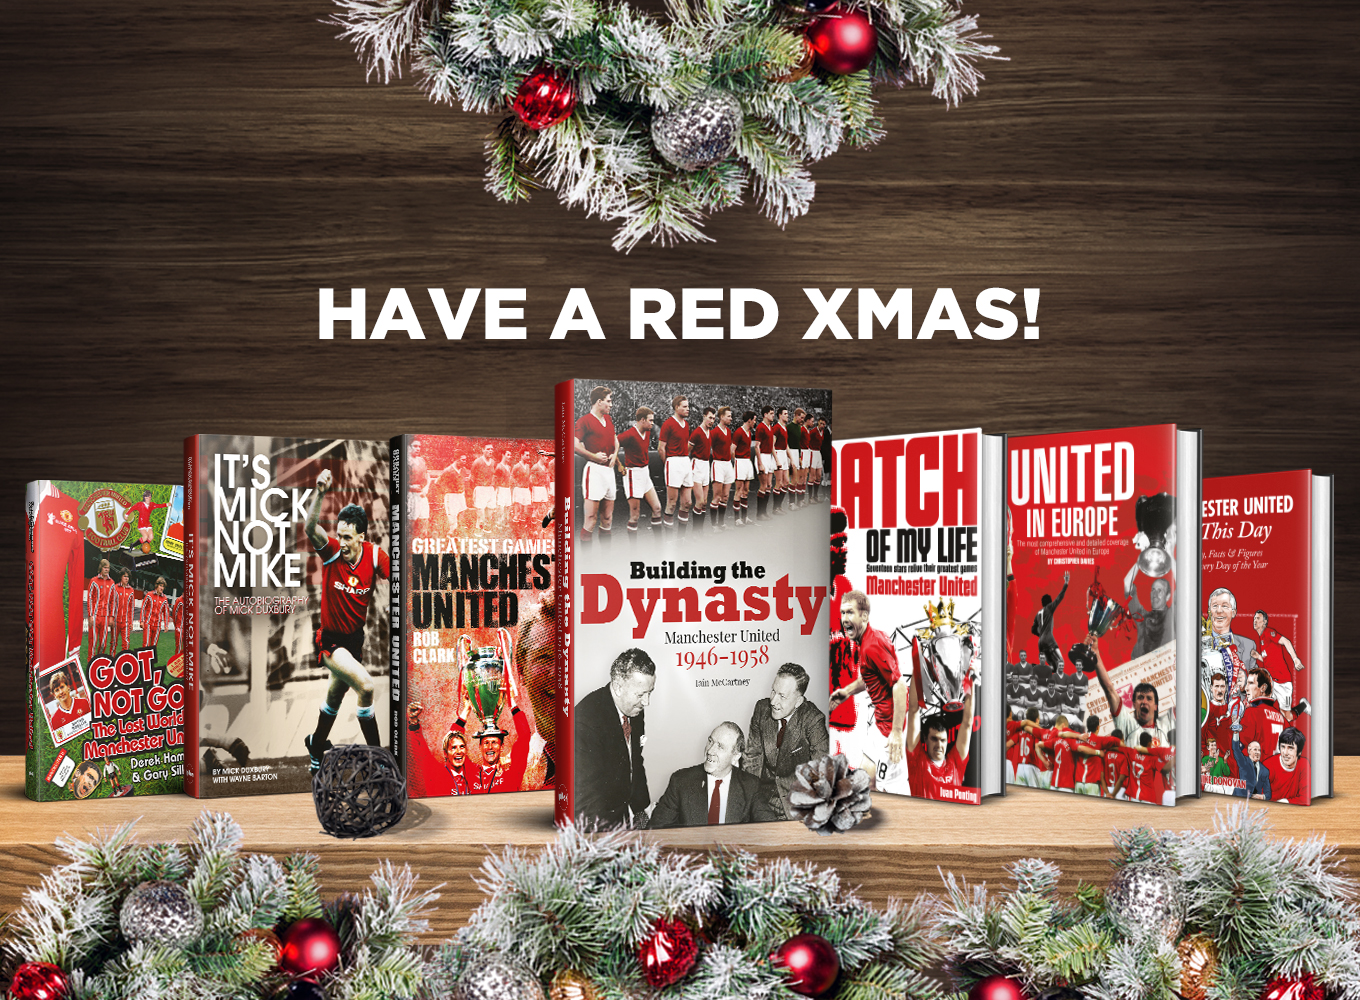 Have a Red Xmas!